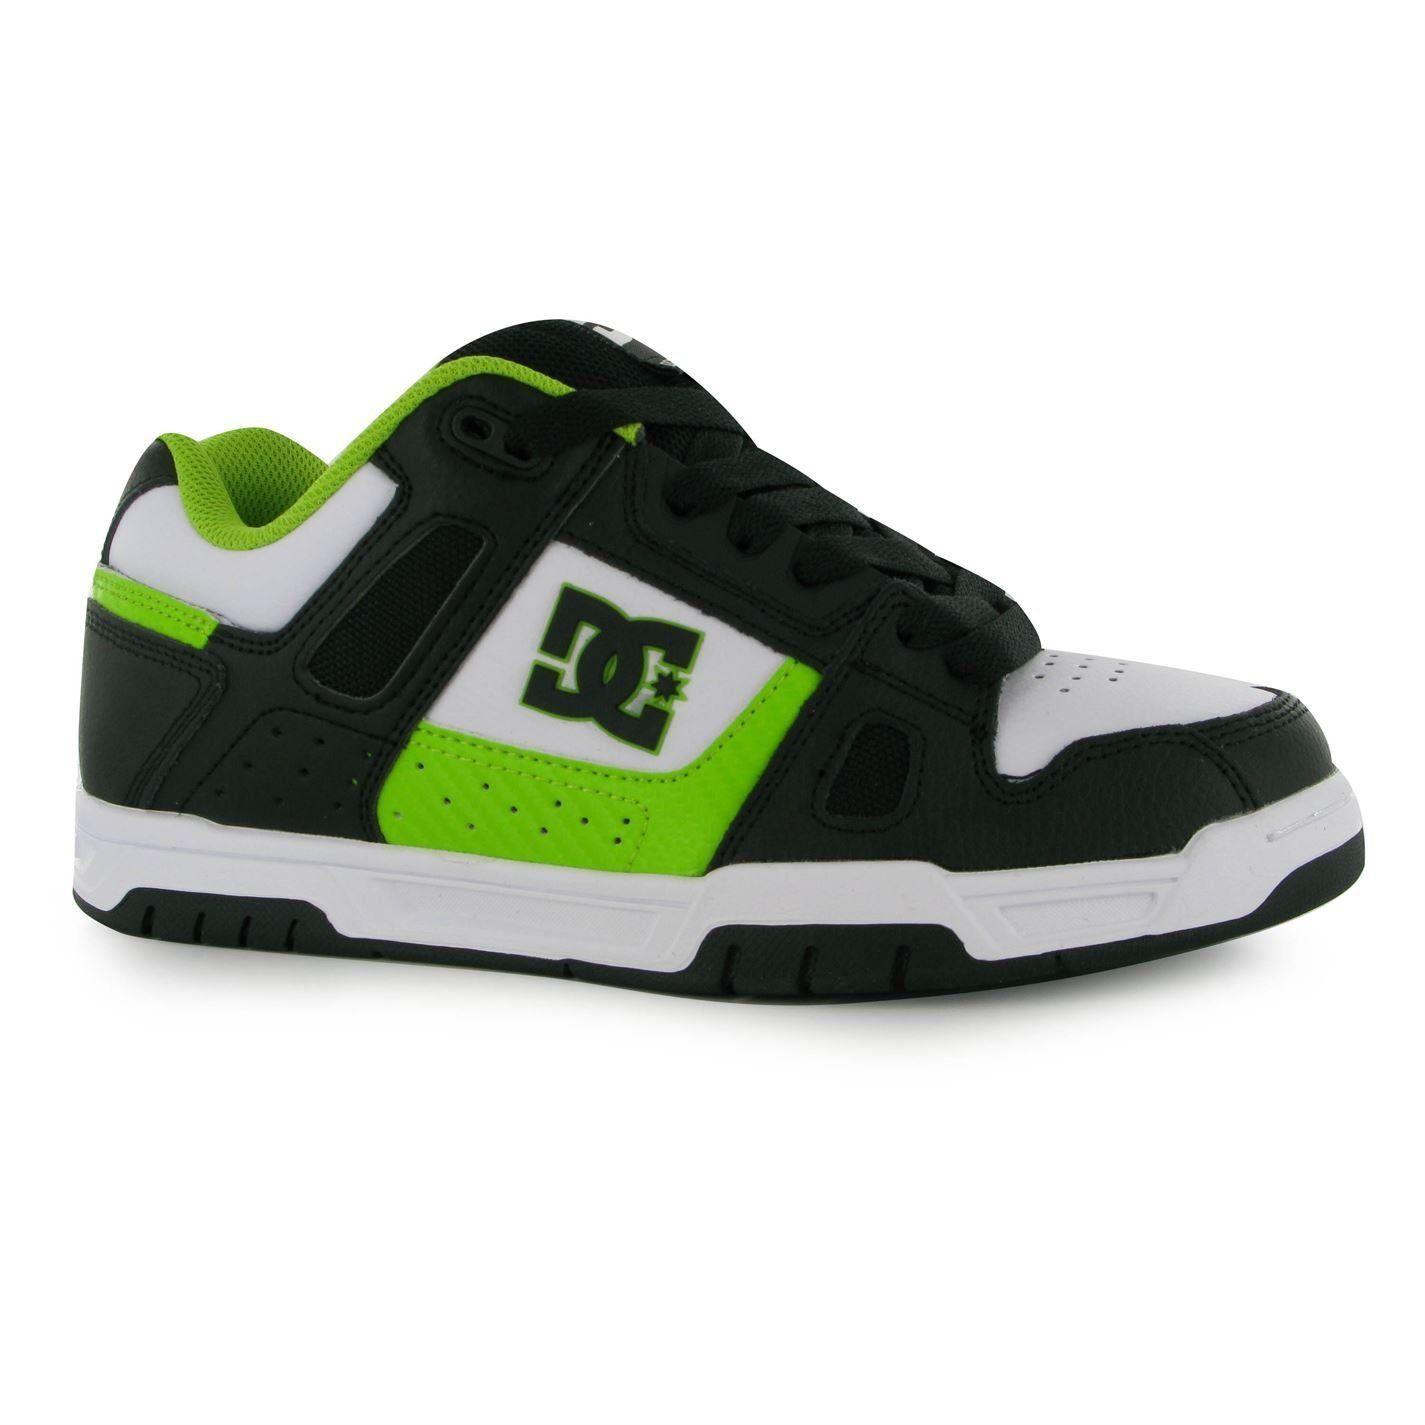 Black and White DC Shoes Logo - DC Stag Skate Shoes Mens Black White Green Casual Trainers Sneakers